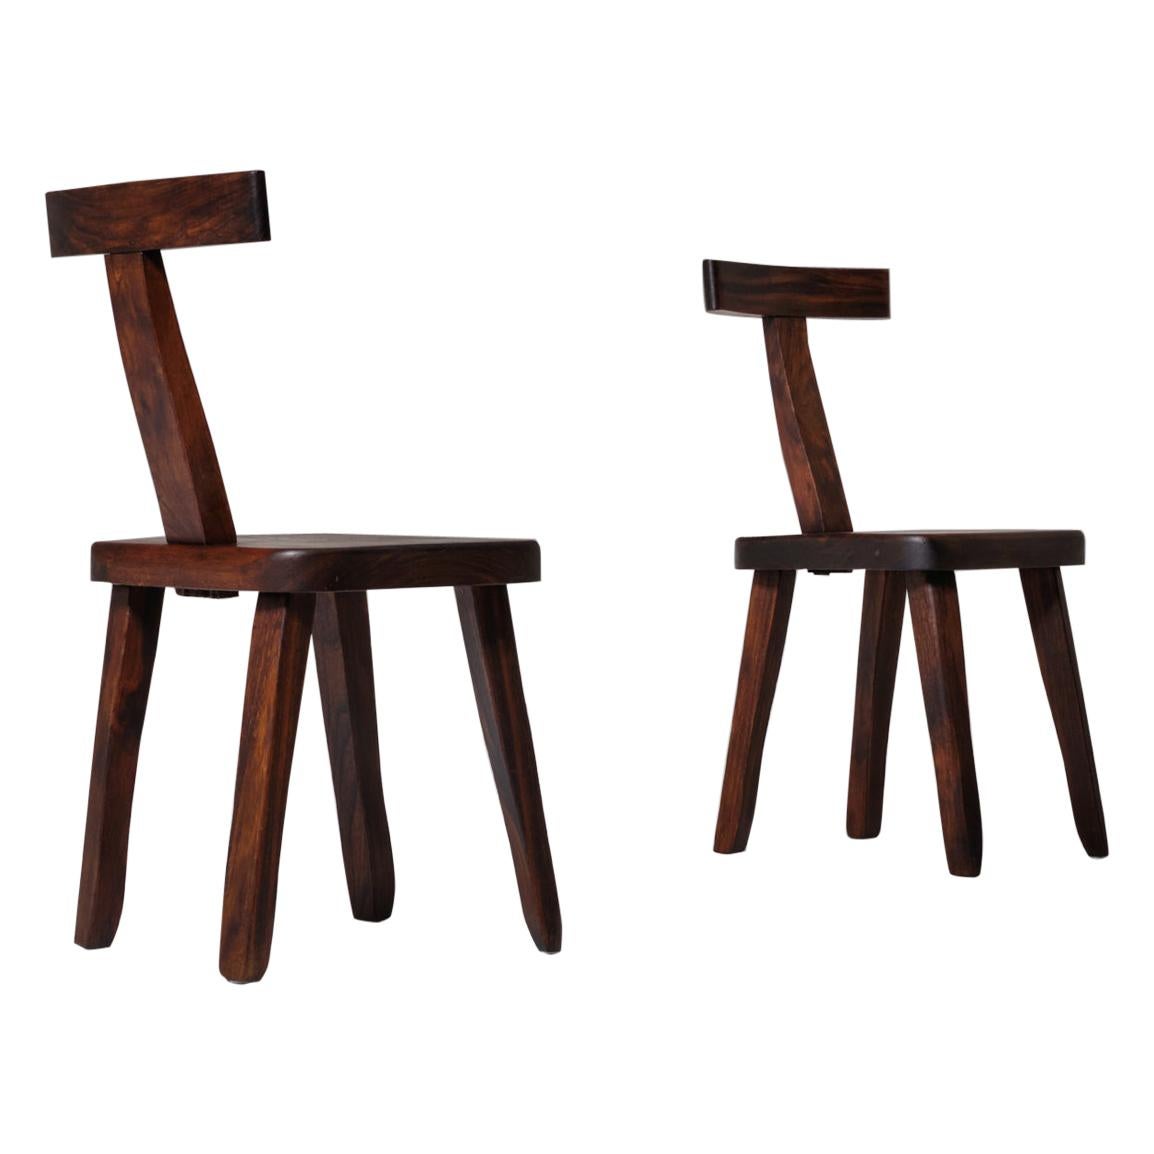 Olavi Hänninen Side Chairs in Stained Elm